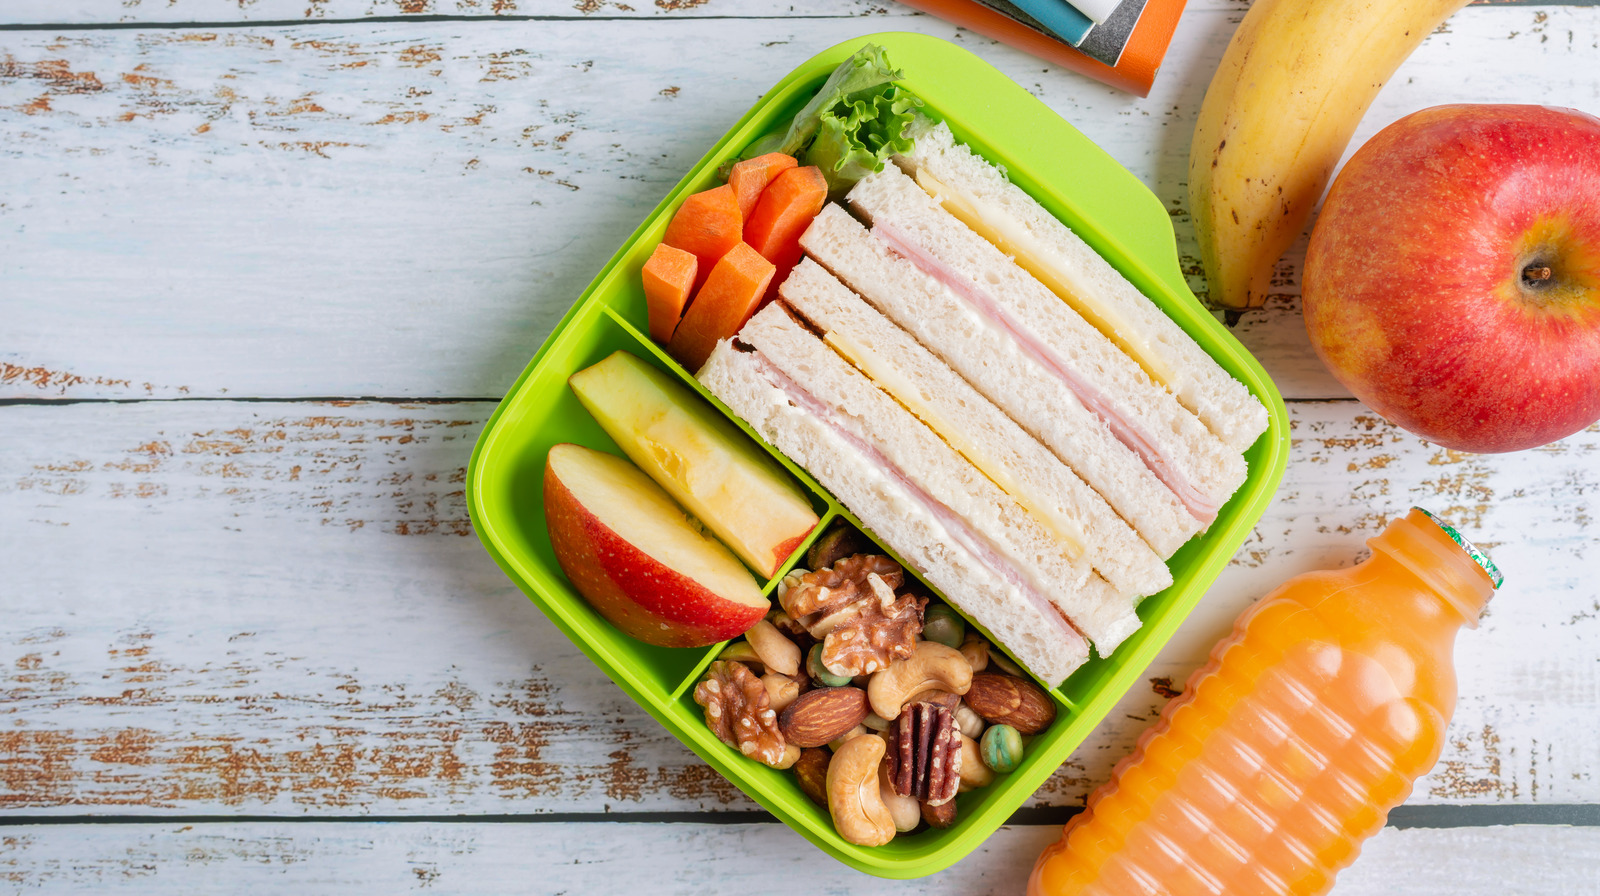 How To Safely Pack A Hot Or Cold School Lunch